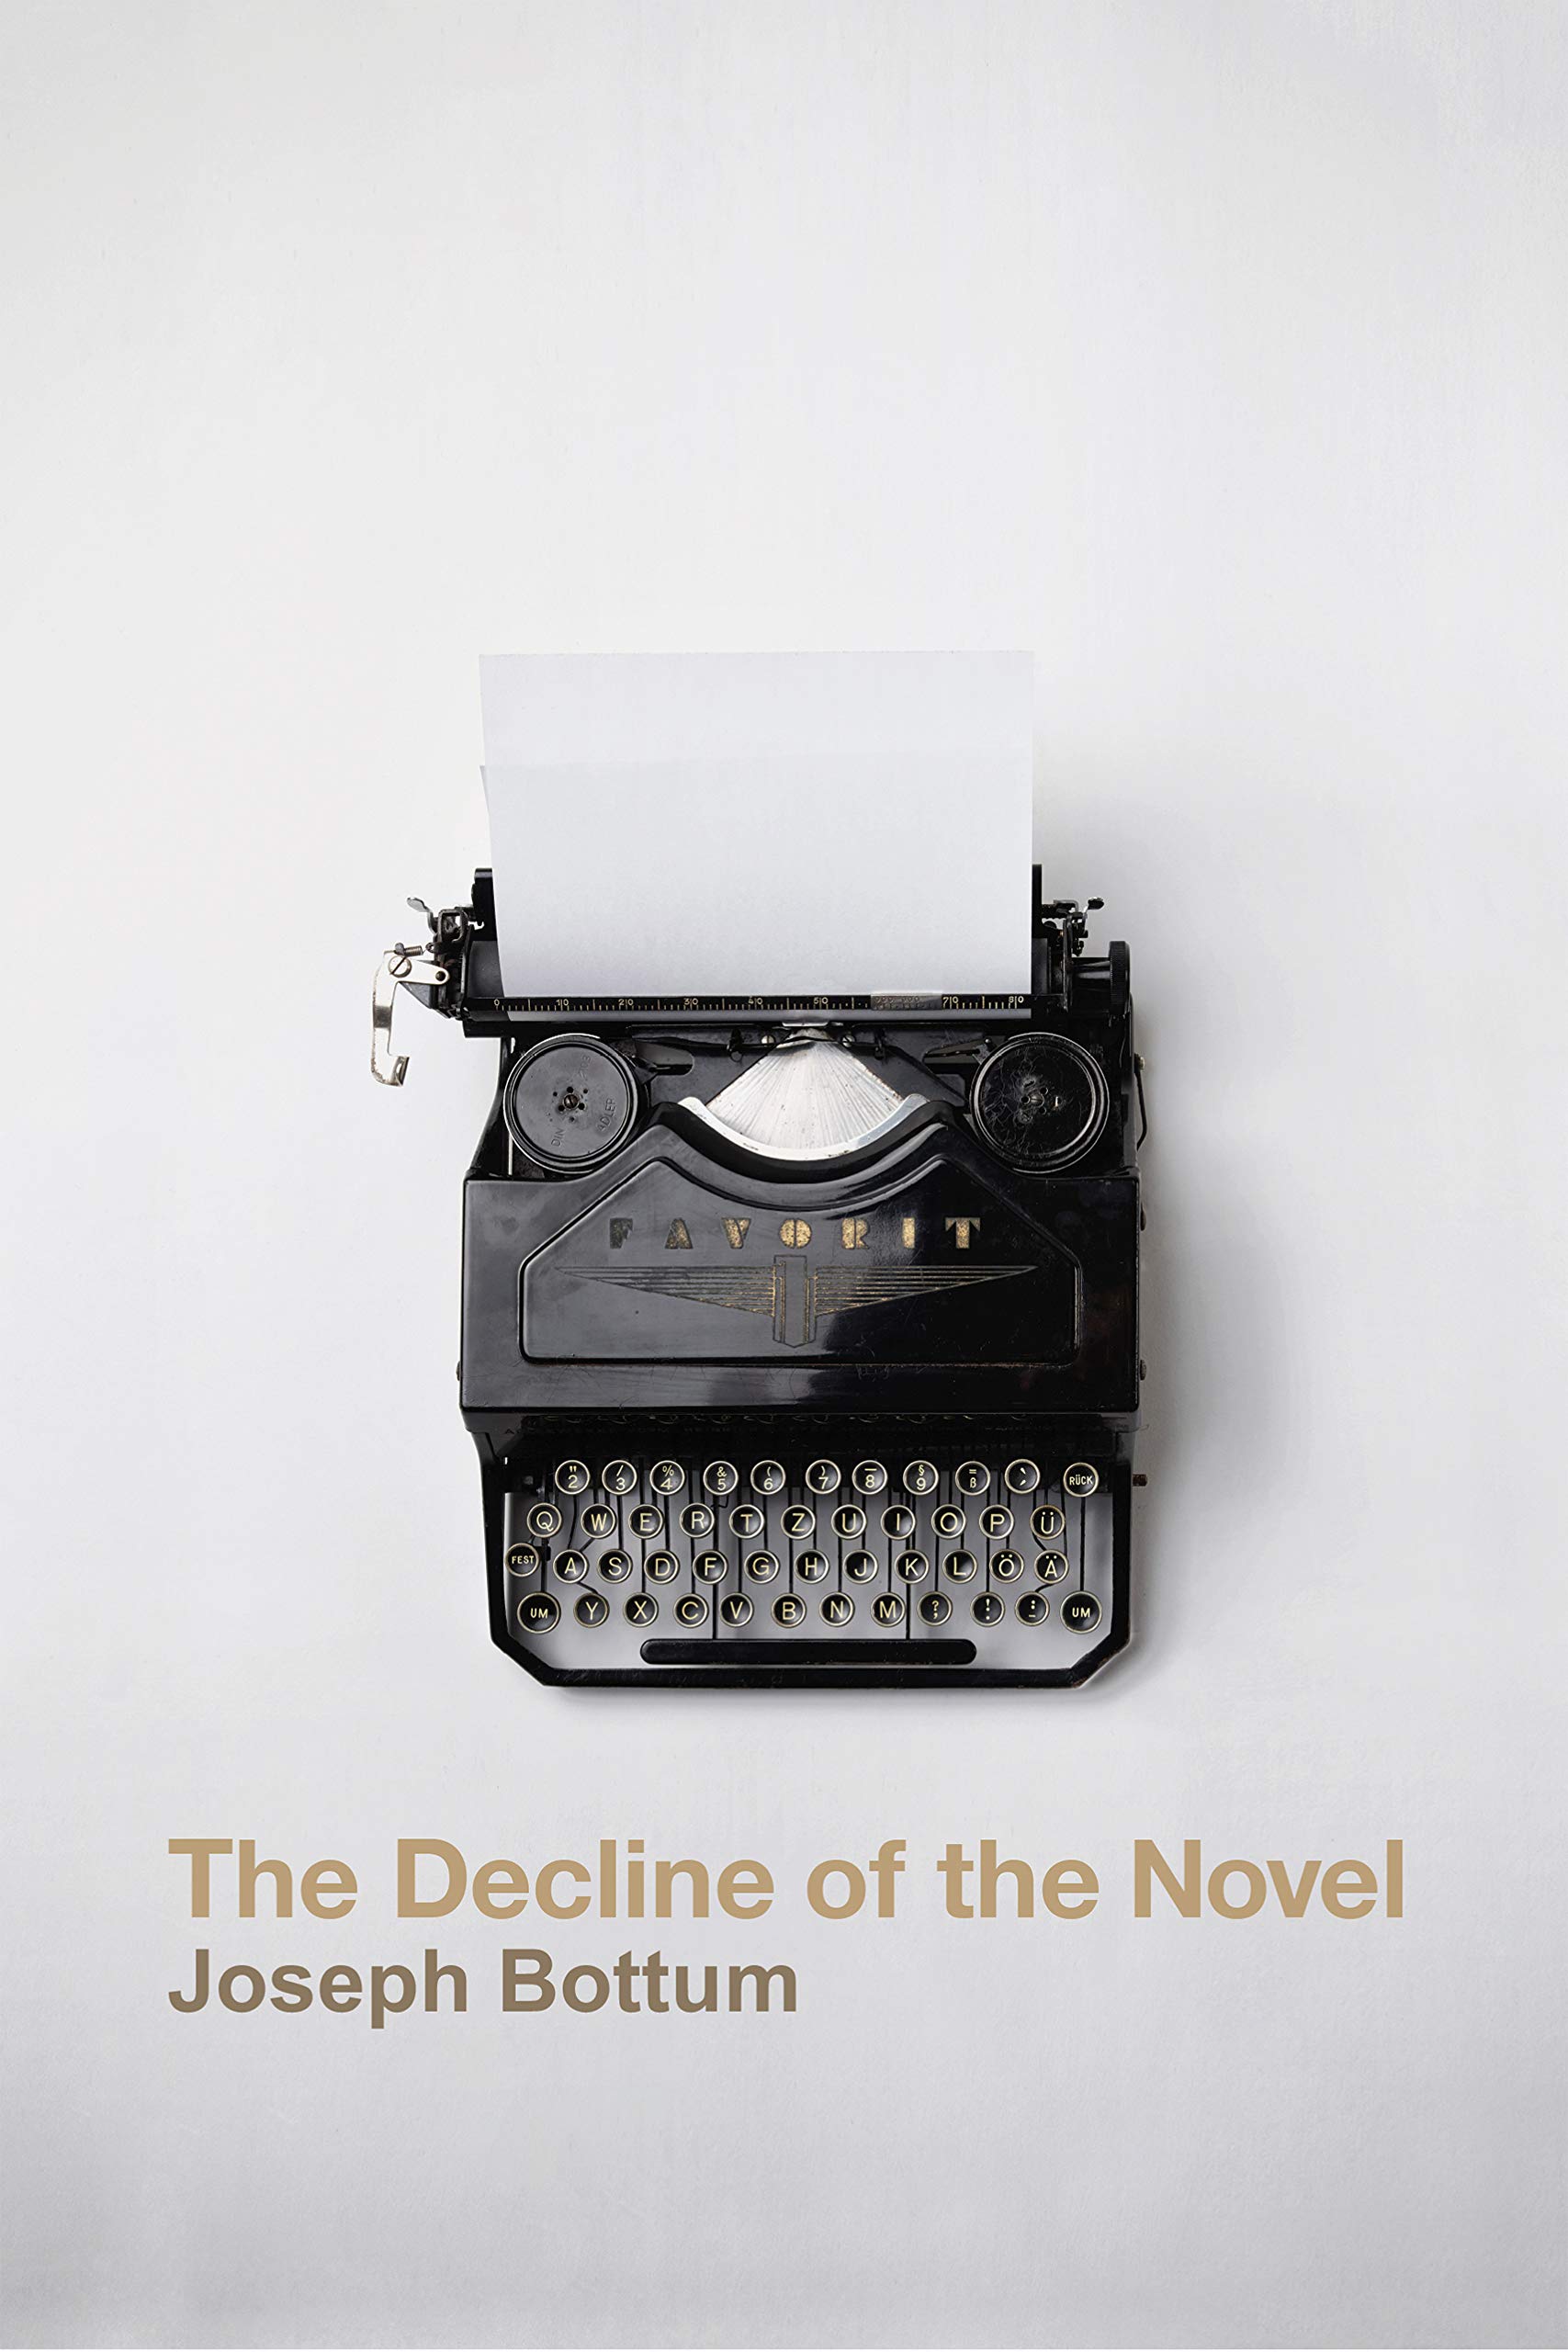 A lifetime of reading has led Dr. Joseph Bottum to create his sixth authored book, The Decline of the Novel.